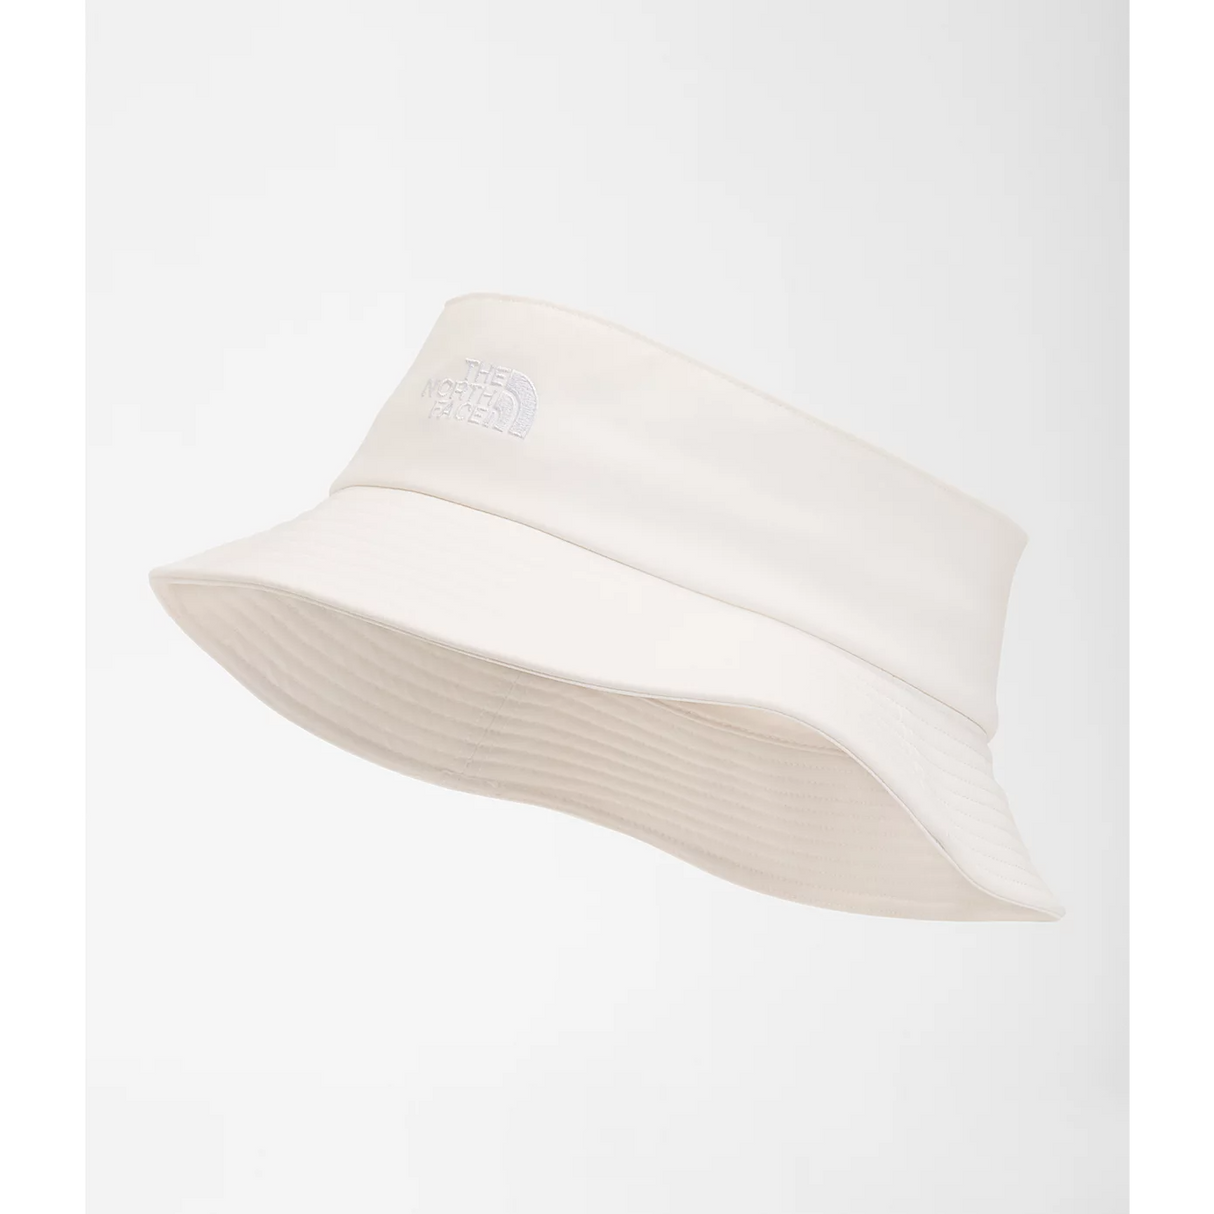 The North Face 2022 Class V Top Knot Bucket Hat